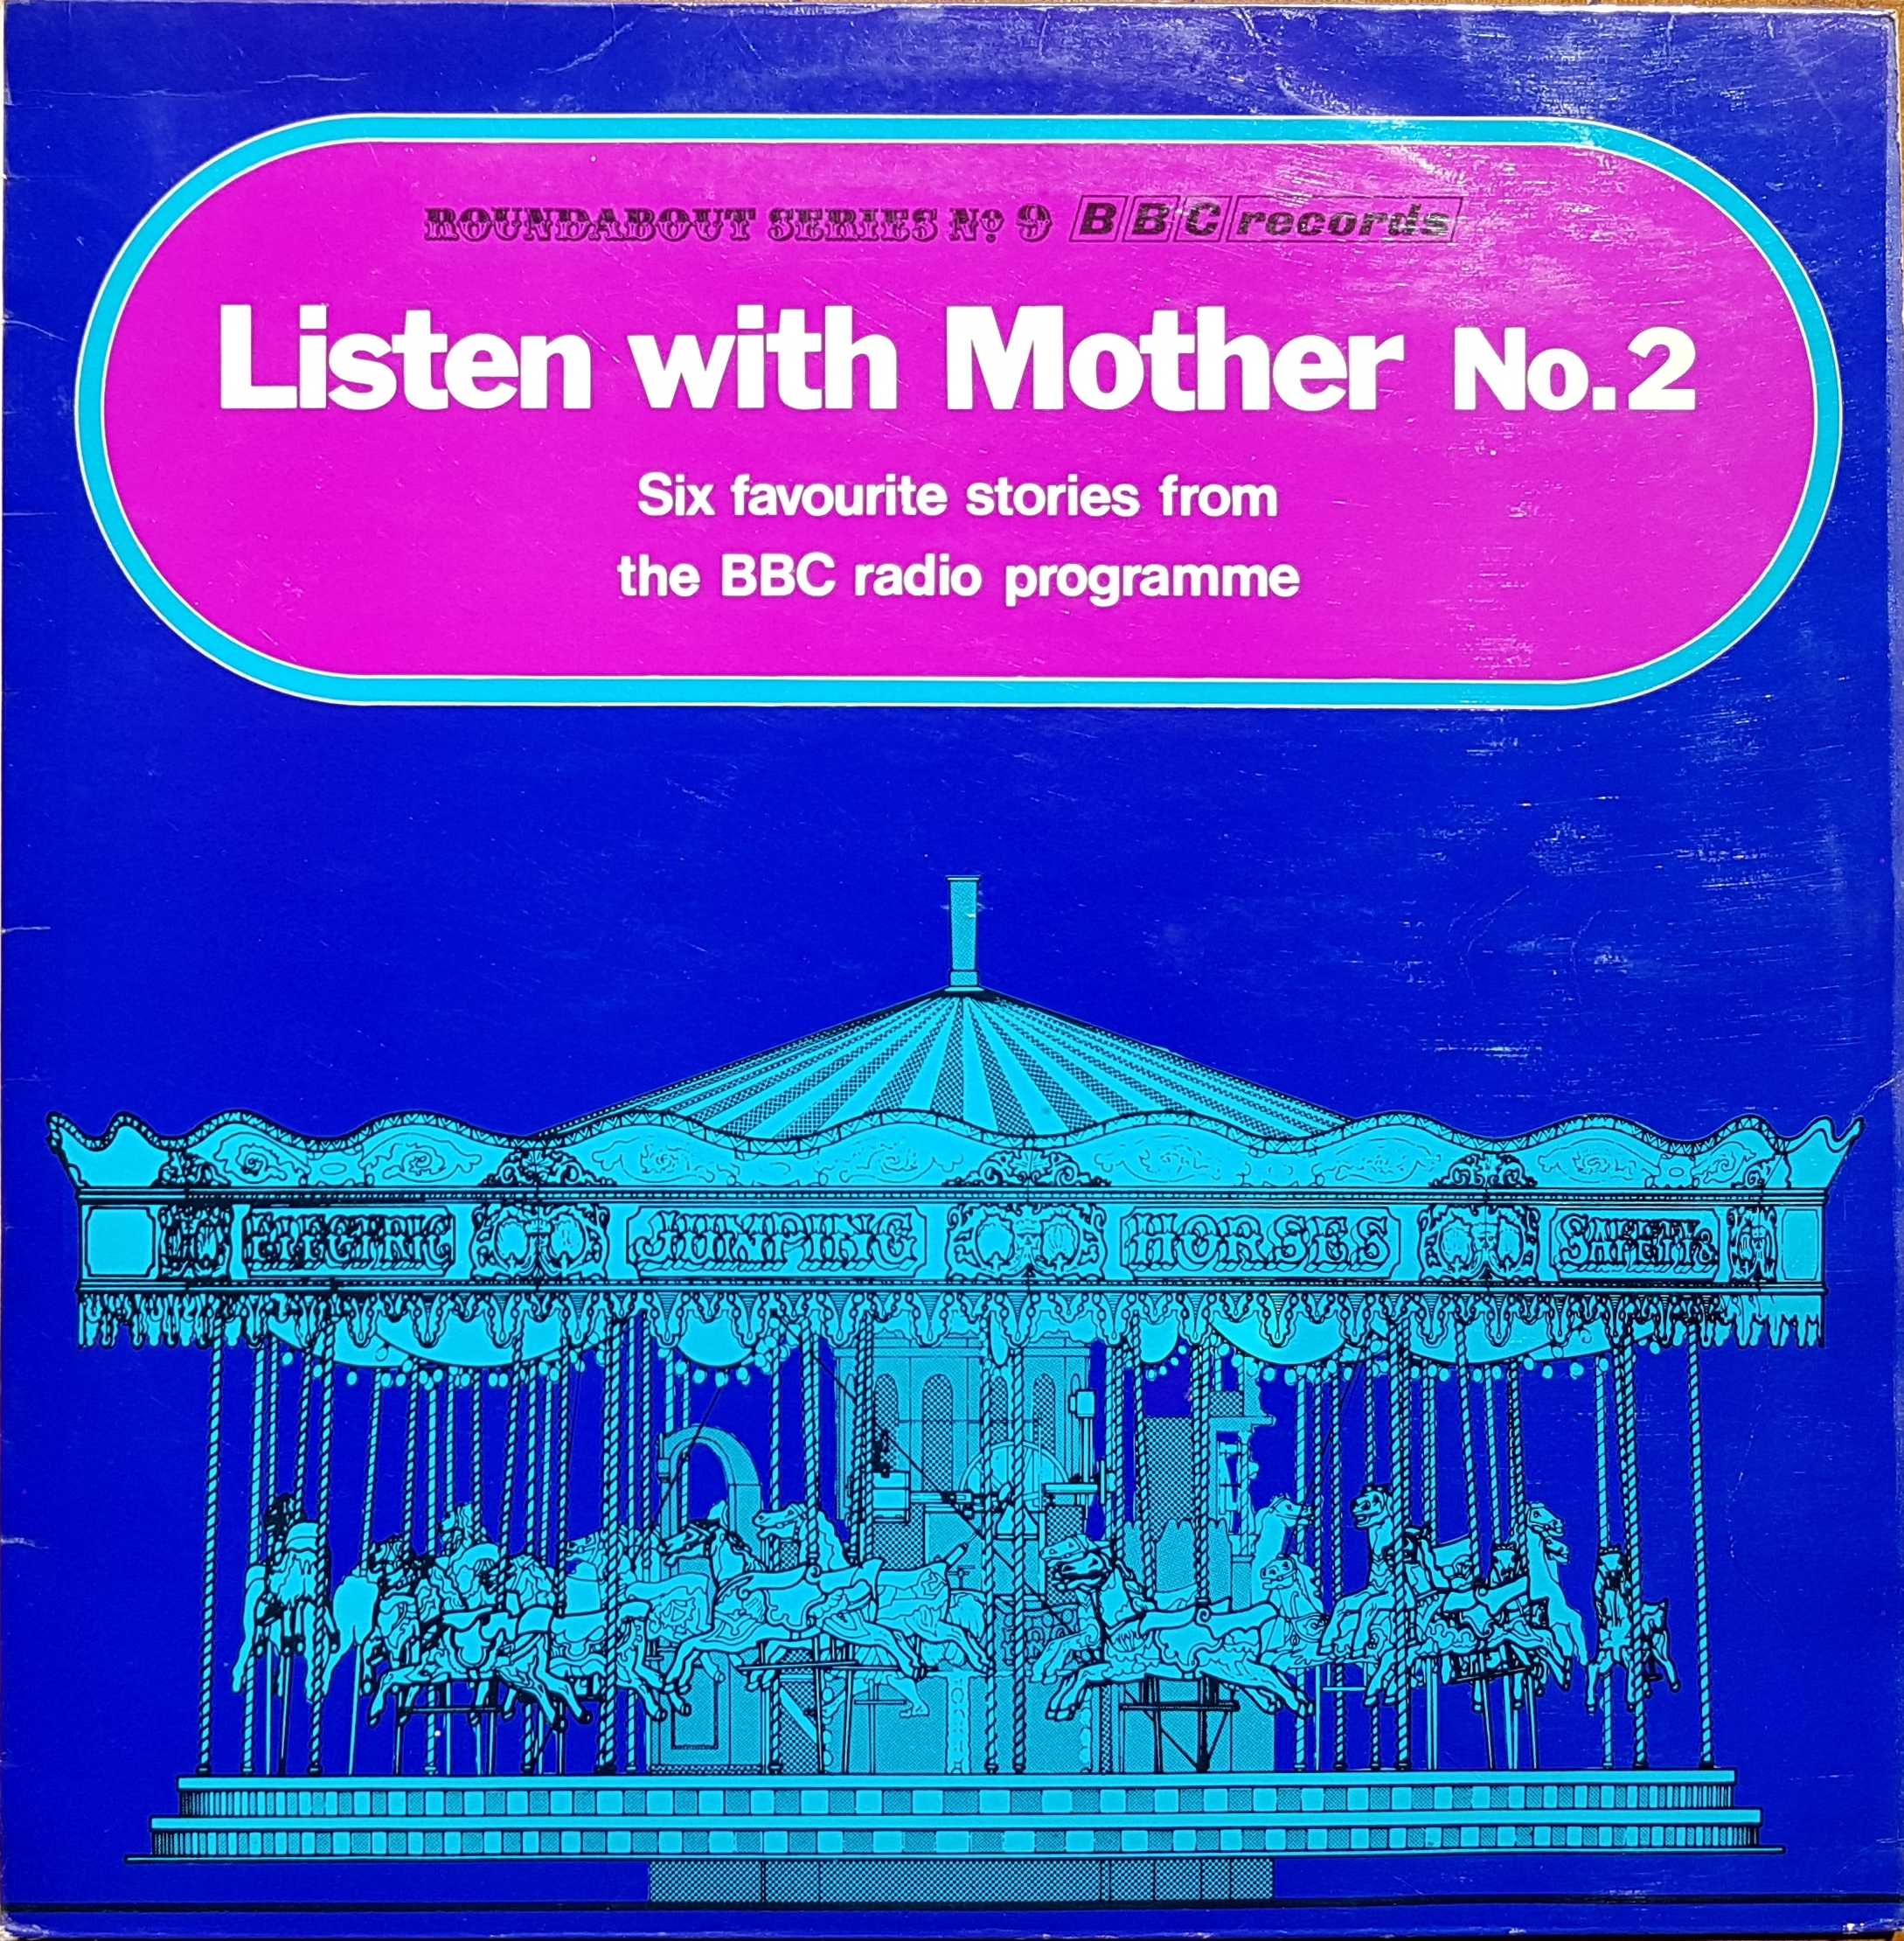 Picture of RBT 9 Listen with mother - Volume 2 by artist Daphne Oxenford / Dorothy Smith from the BBC albums - Records and Tapes library